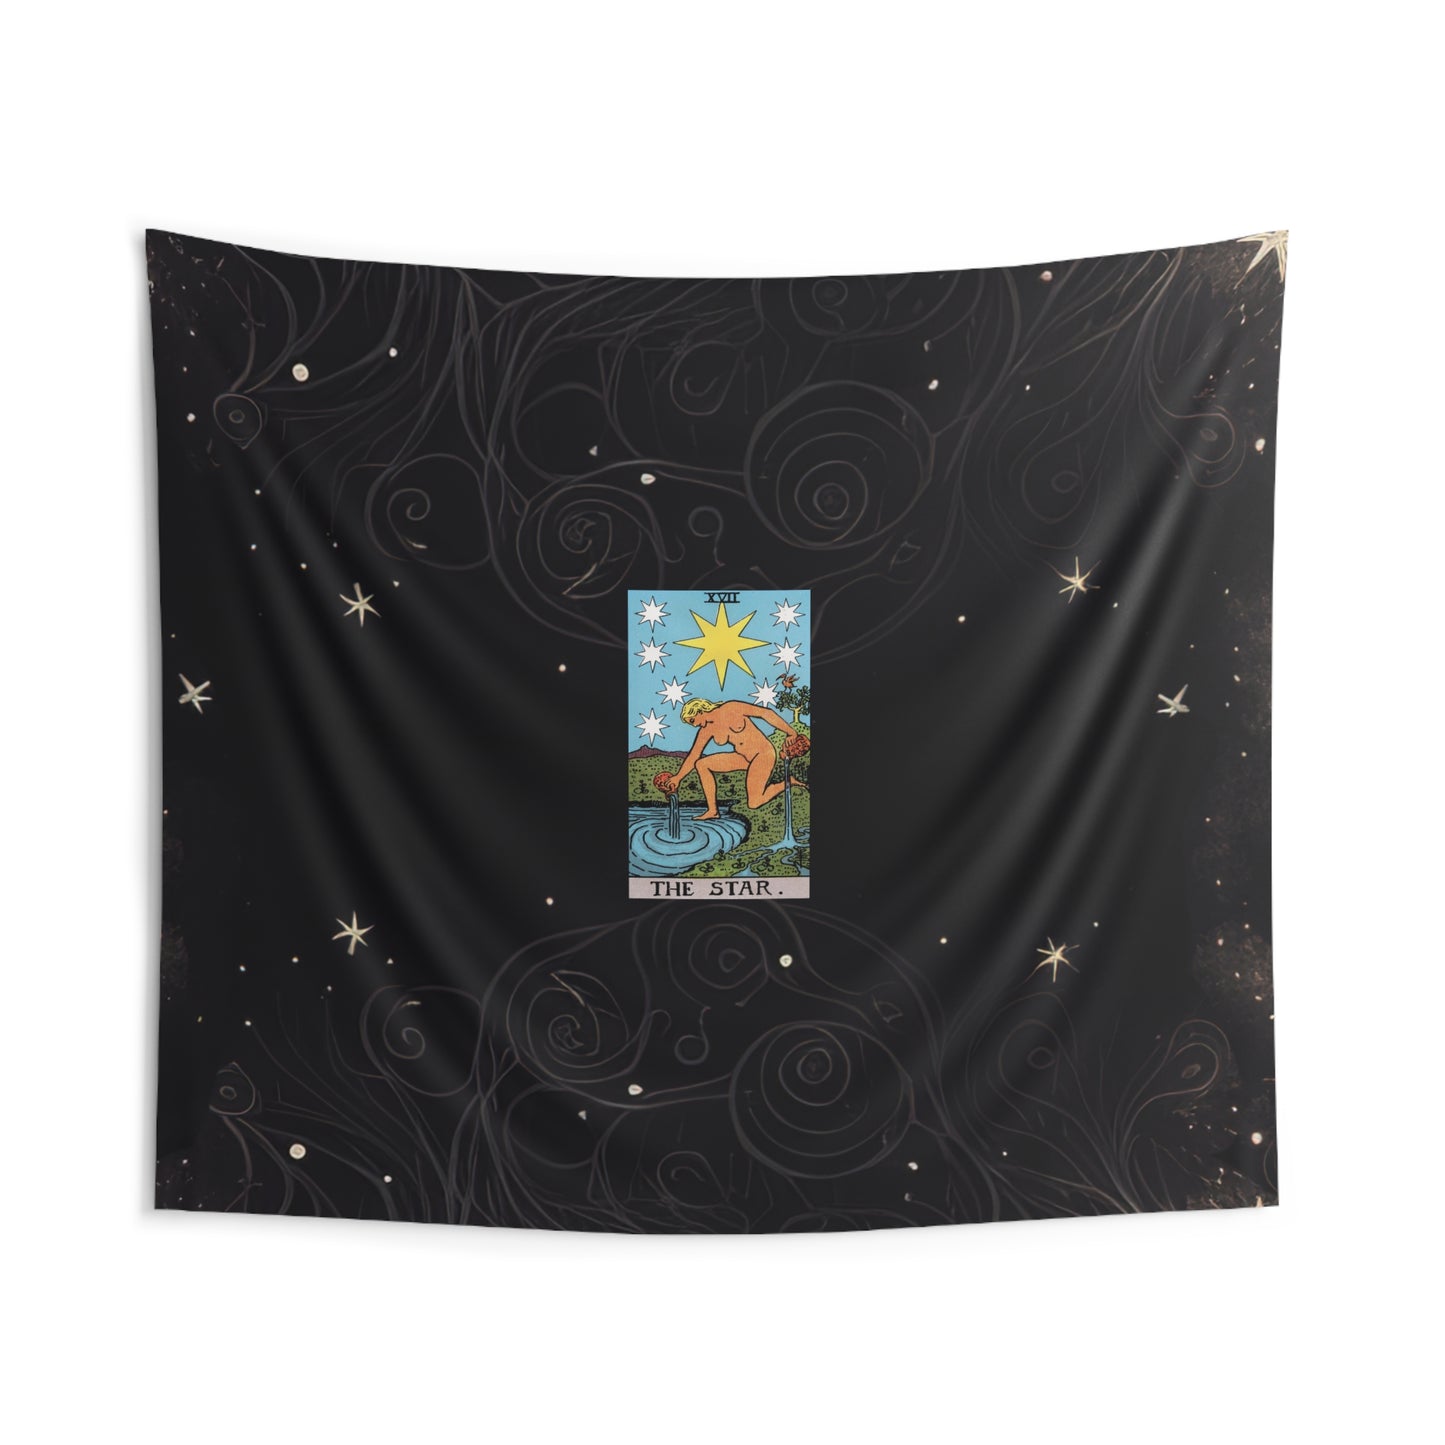 The Star Tarot Card Altar Cloth or Tapestry with Starry Background